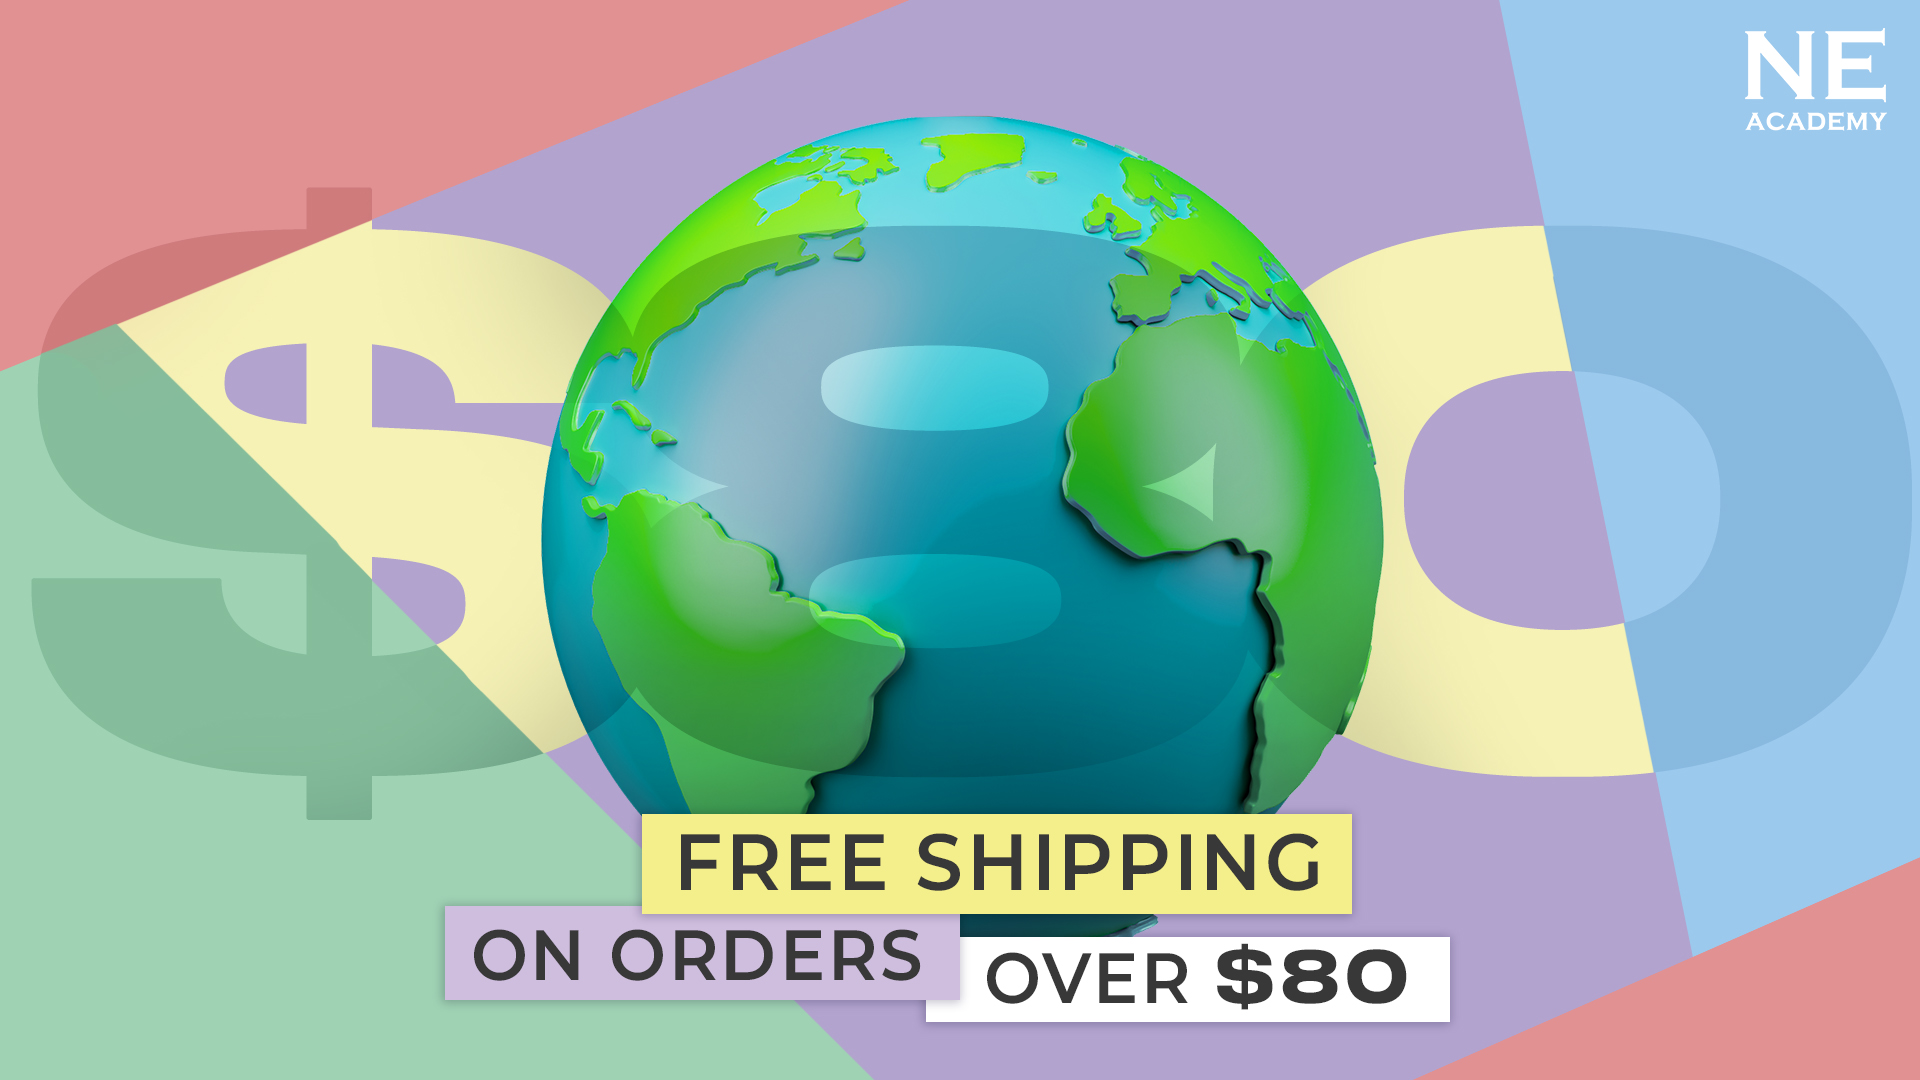 Free shipping for orders over $80